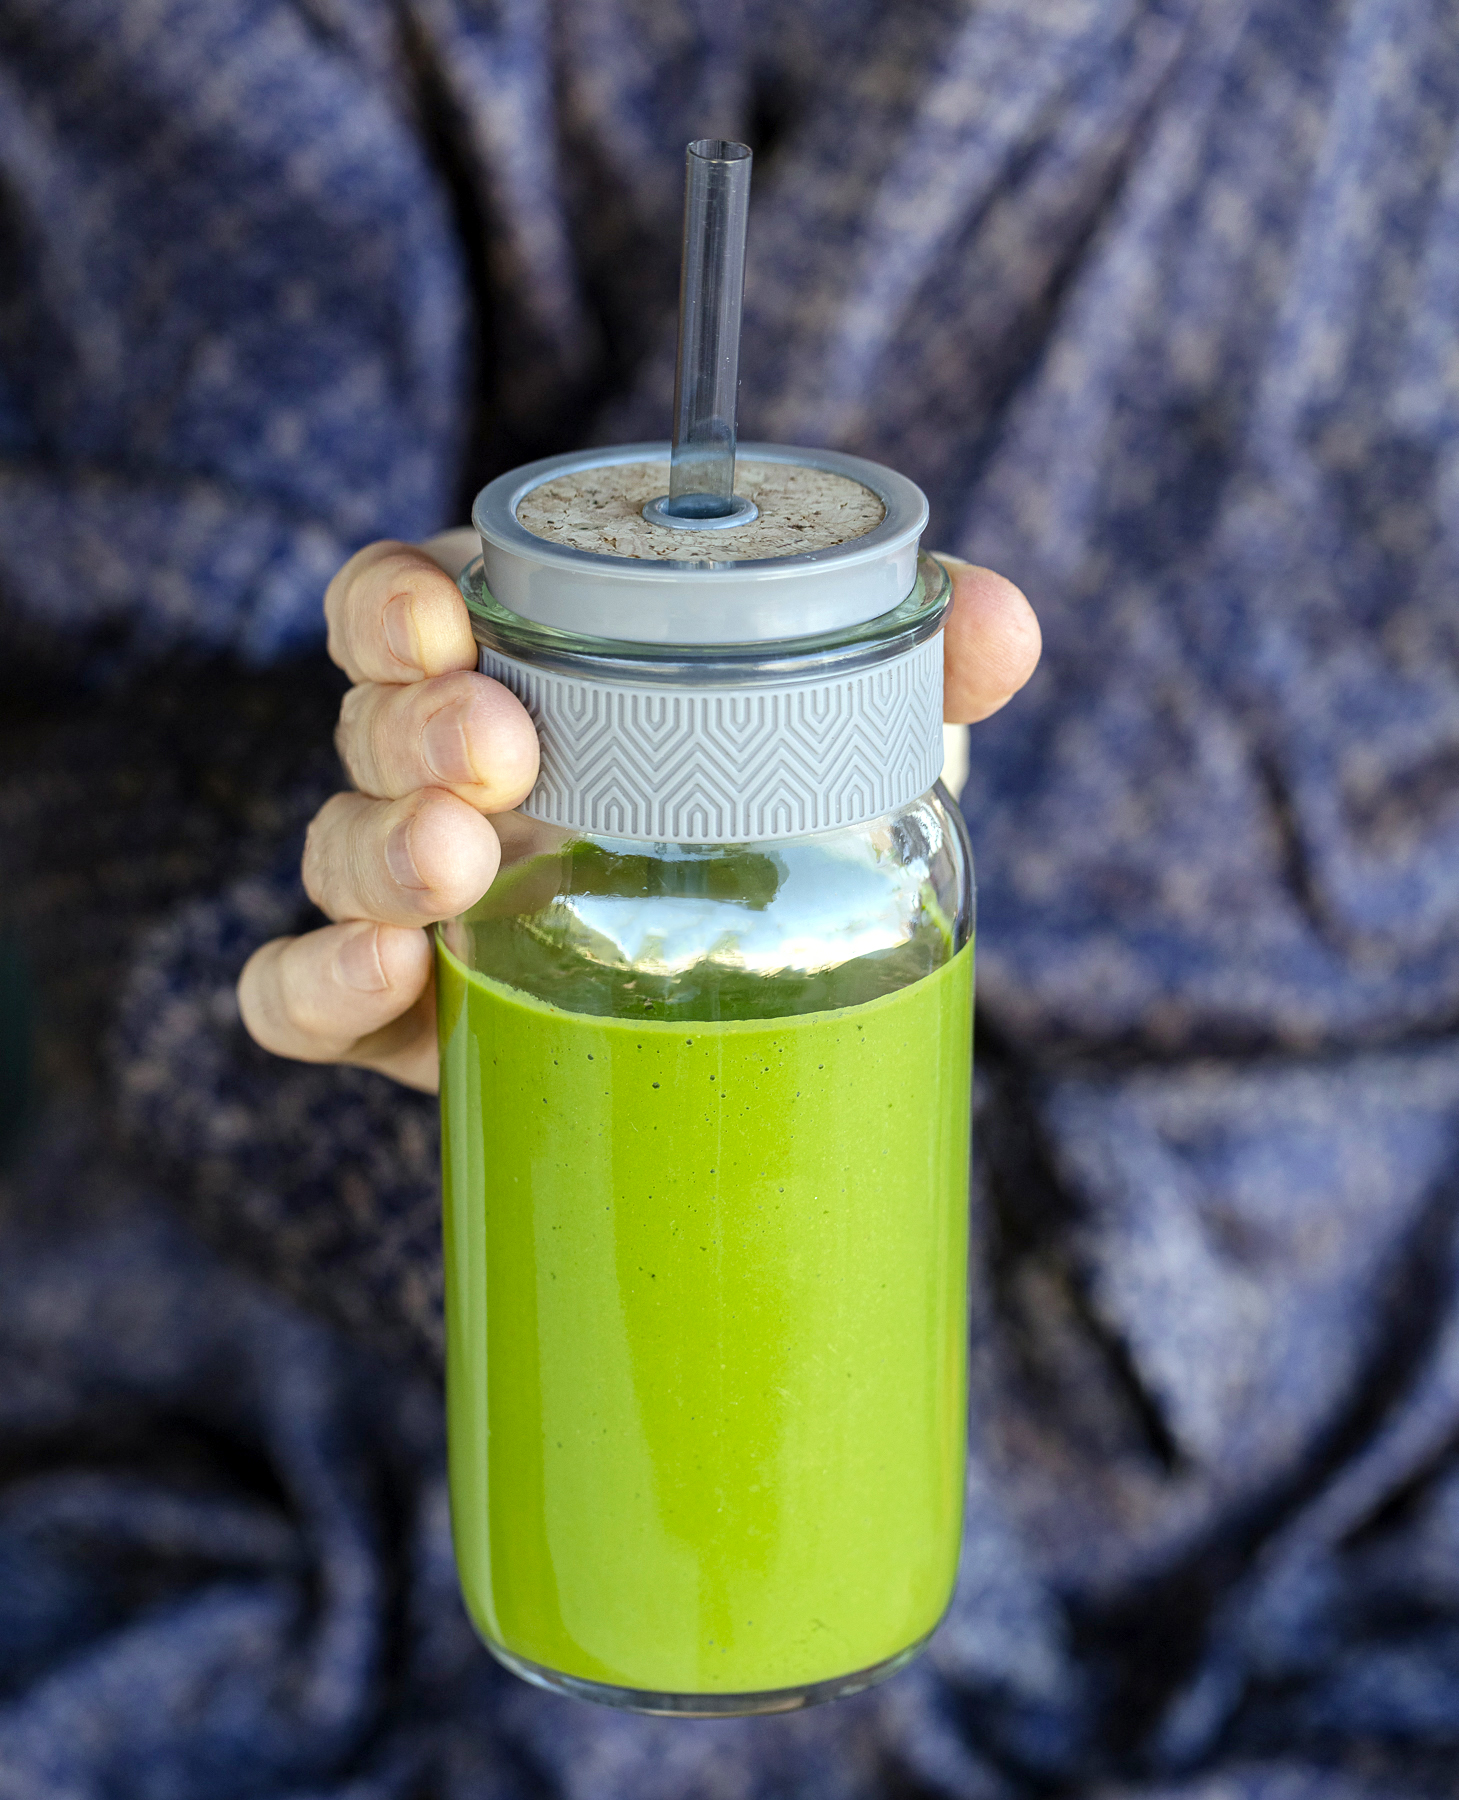 Yellowstone tribue recipe of a man in a bathrobe holding a green smoothie.